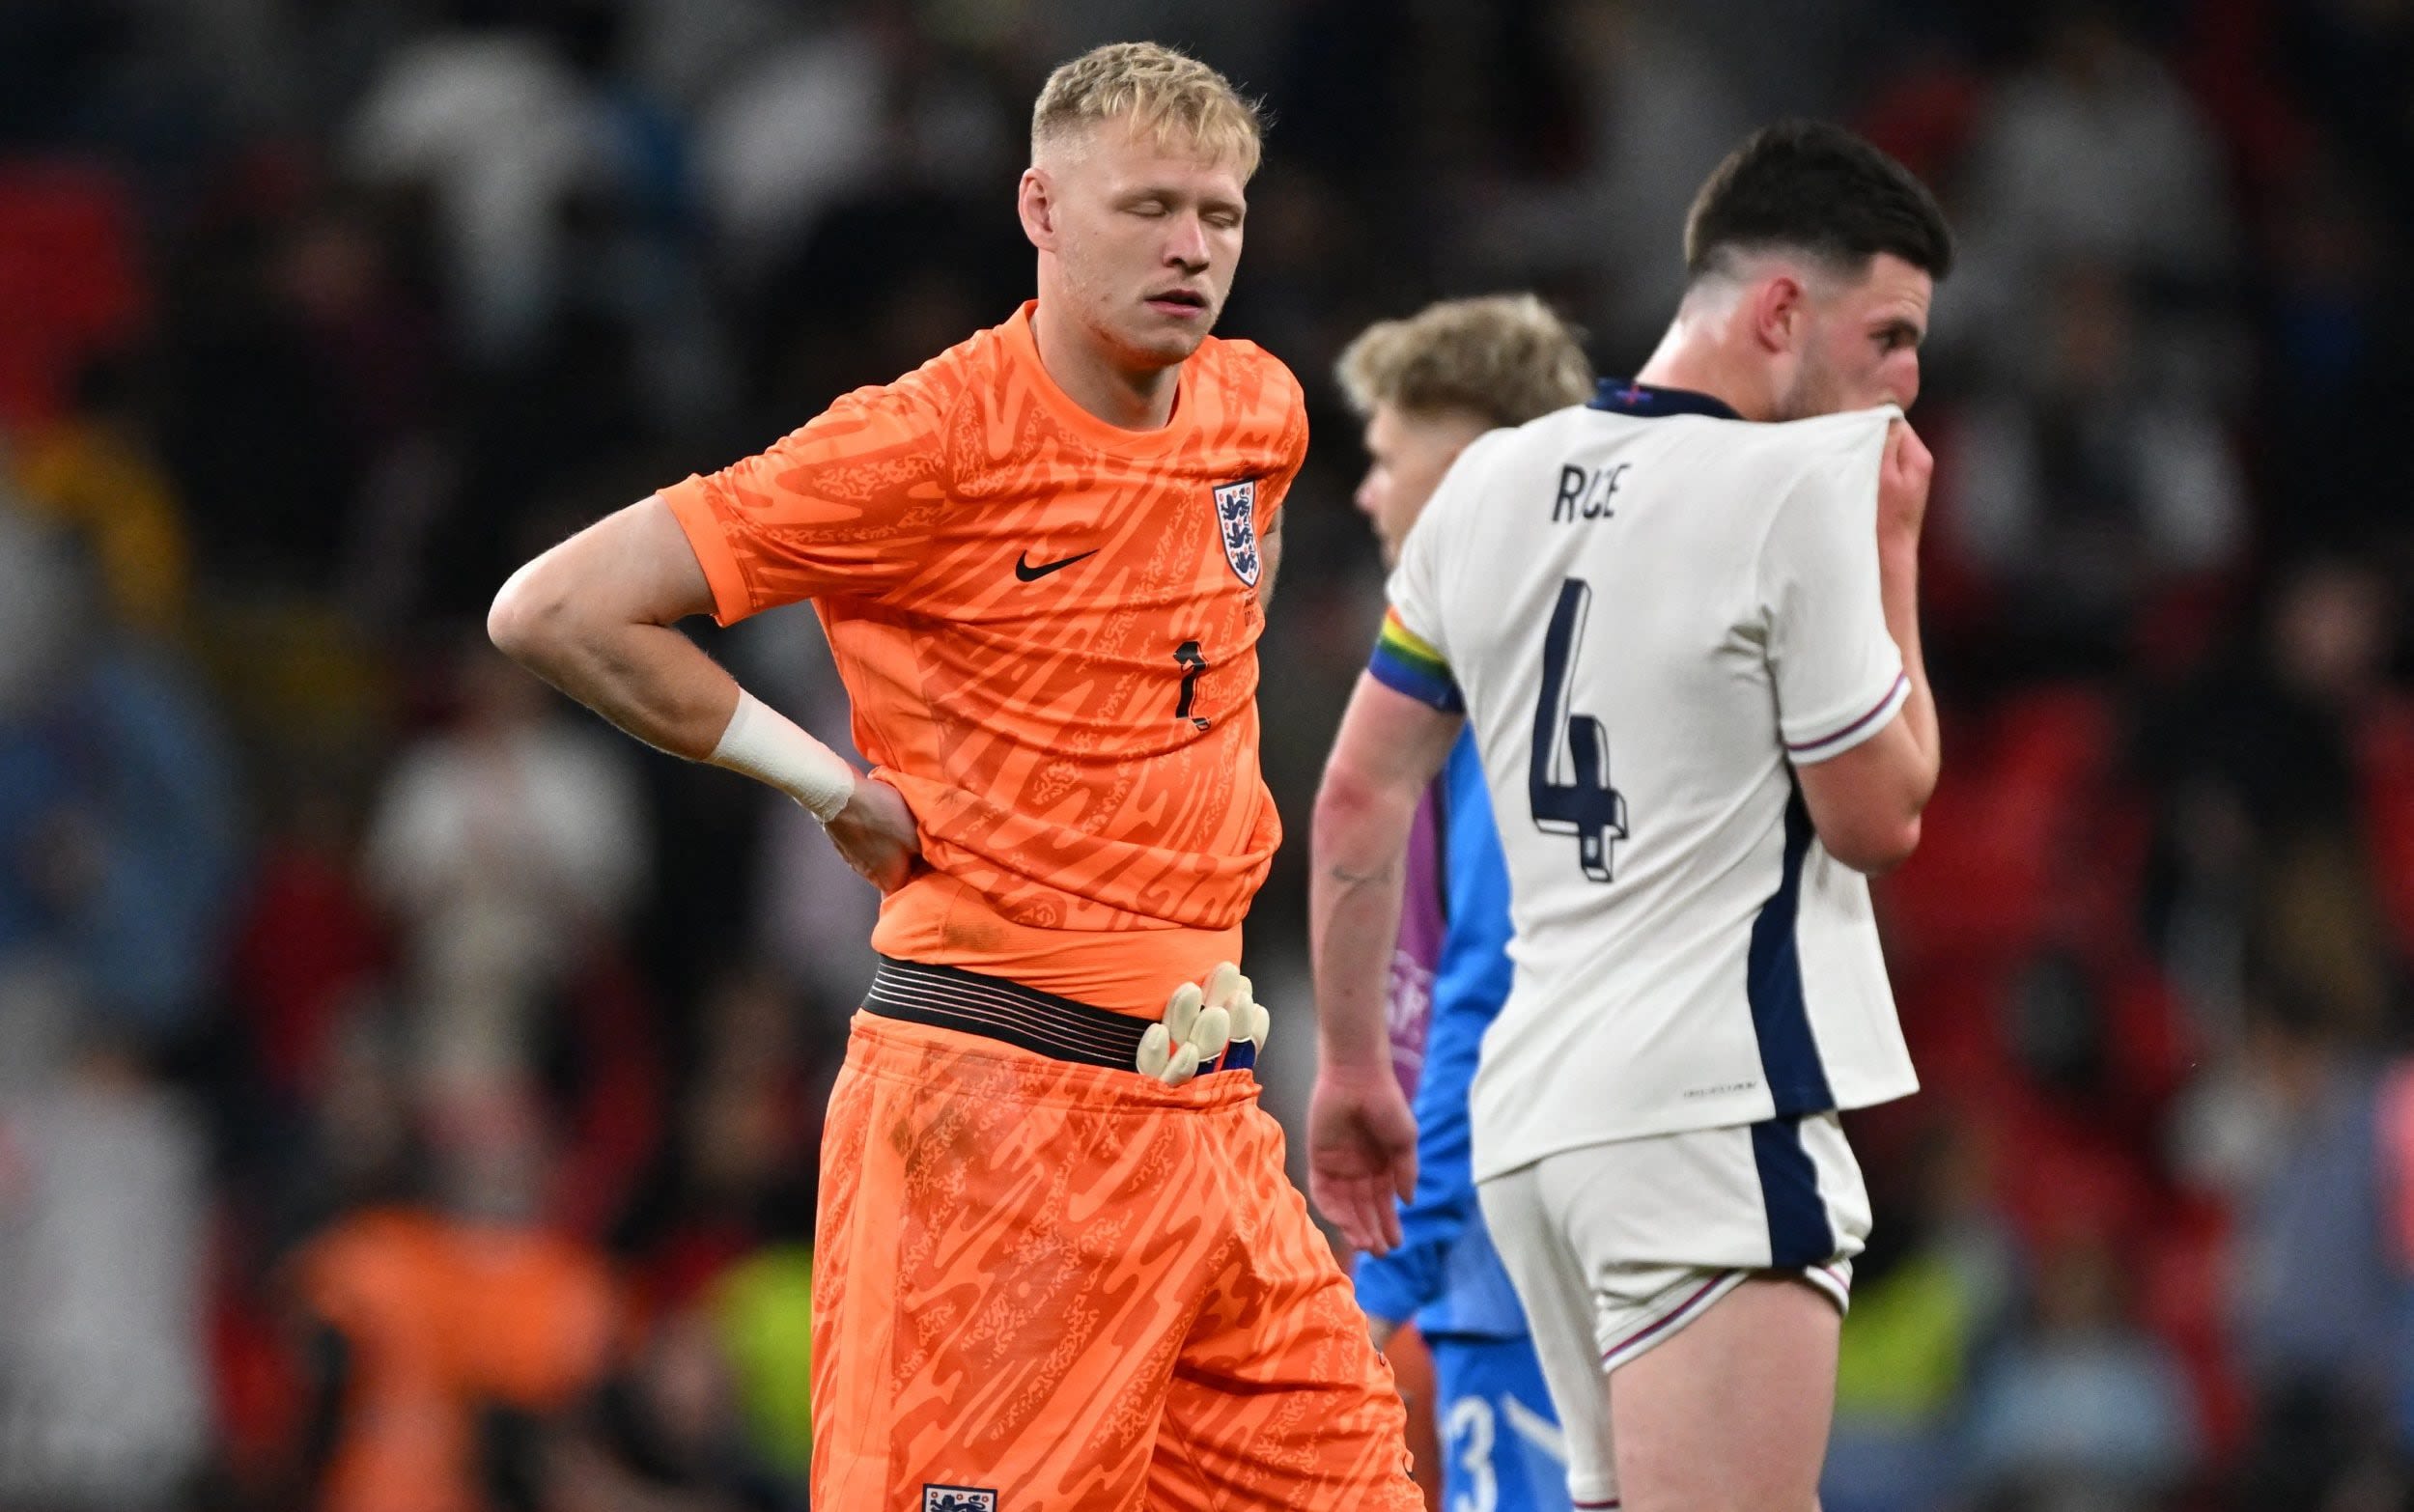 England player ratings vs Iceland: who should start Euro 2024 opener?